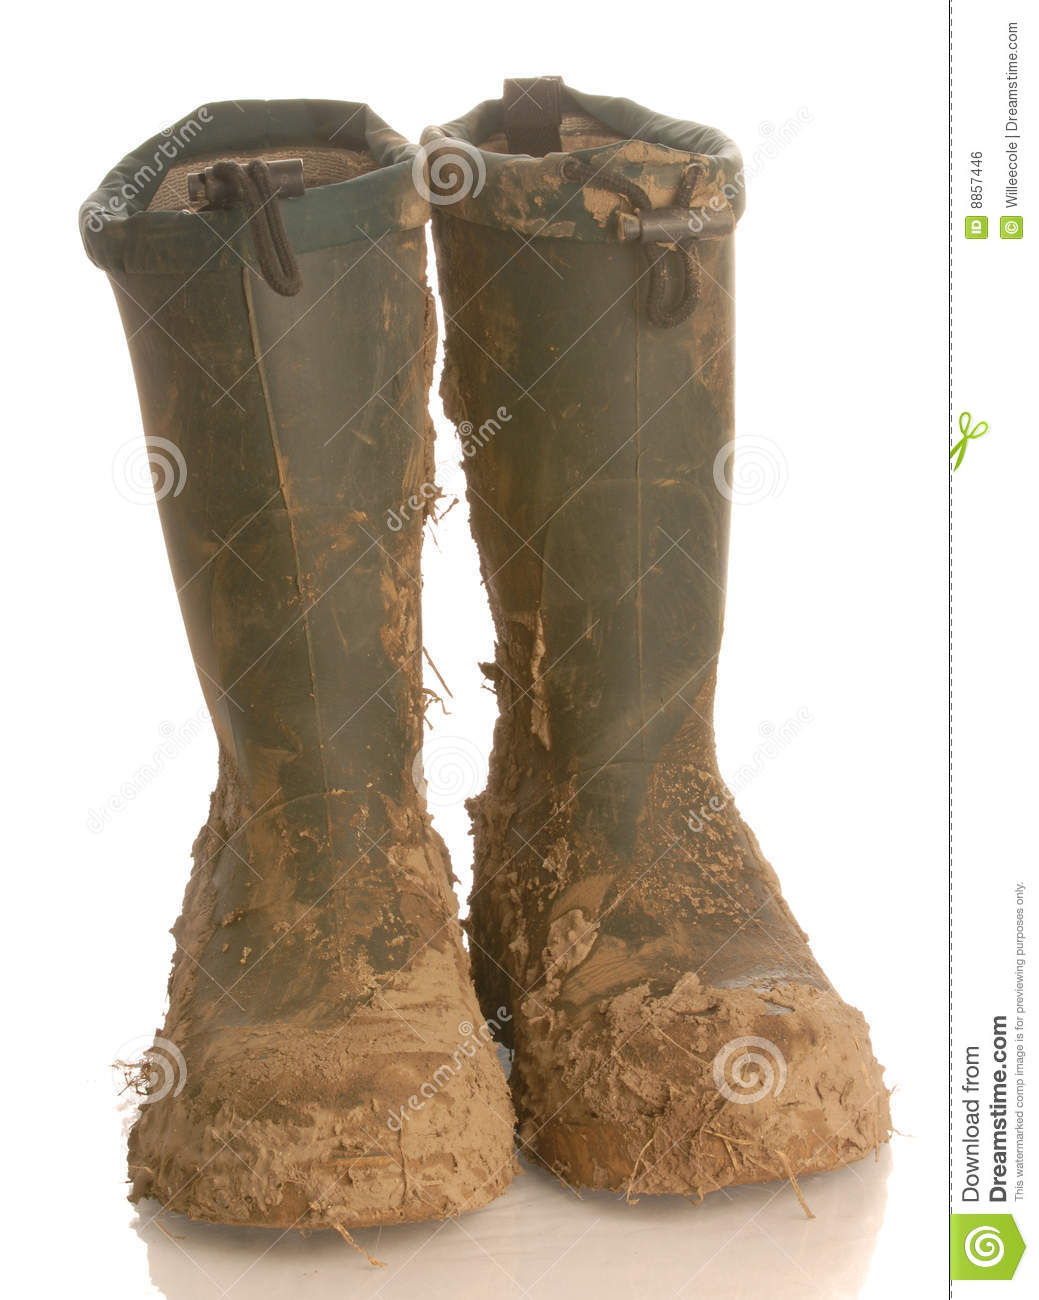 Muddy Rubber Boots Royalty Free Stock Image   Image  8857446